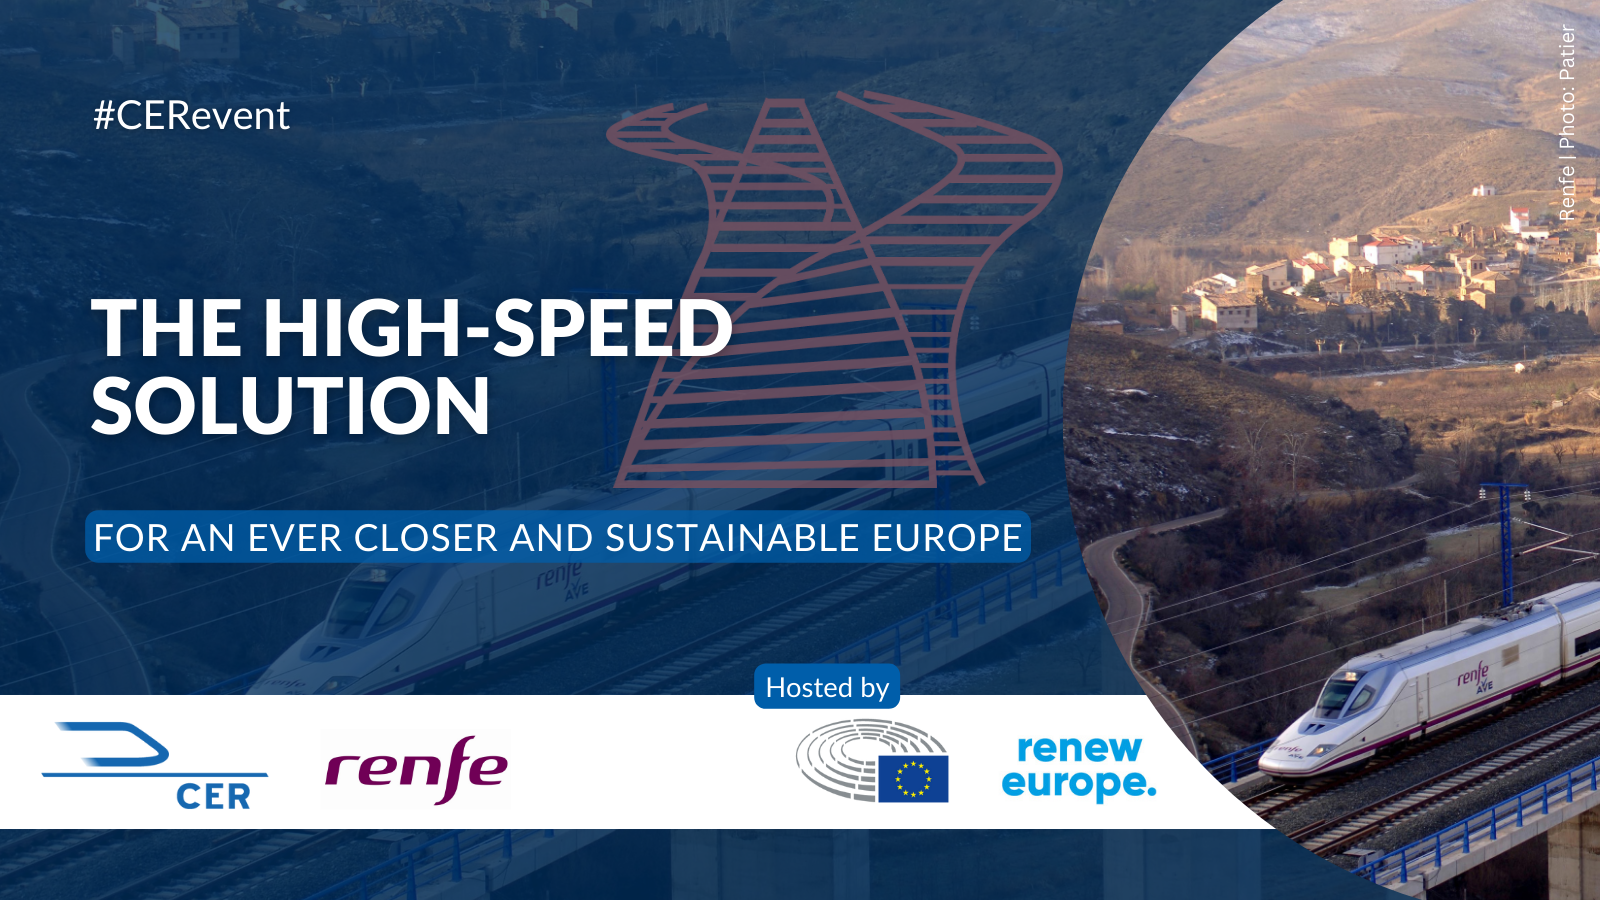 The High-Speed Solution for an ever closer and sustainable Europe